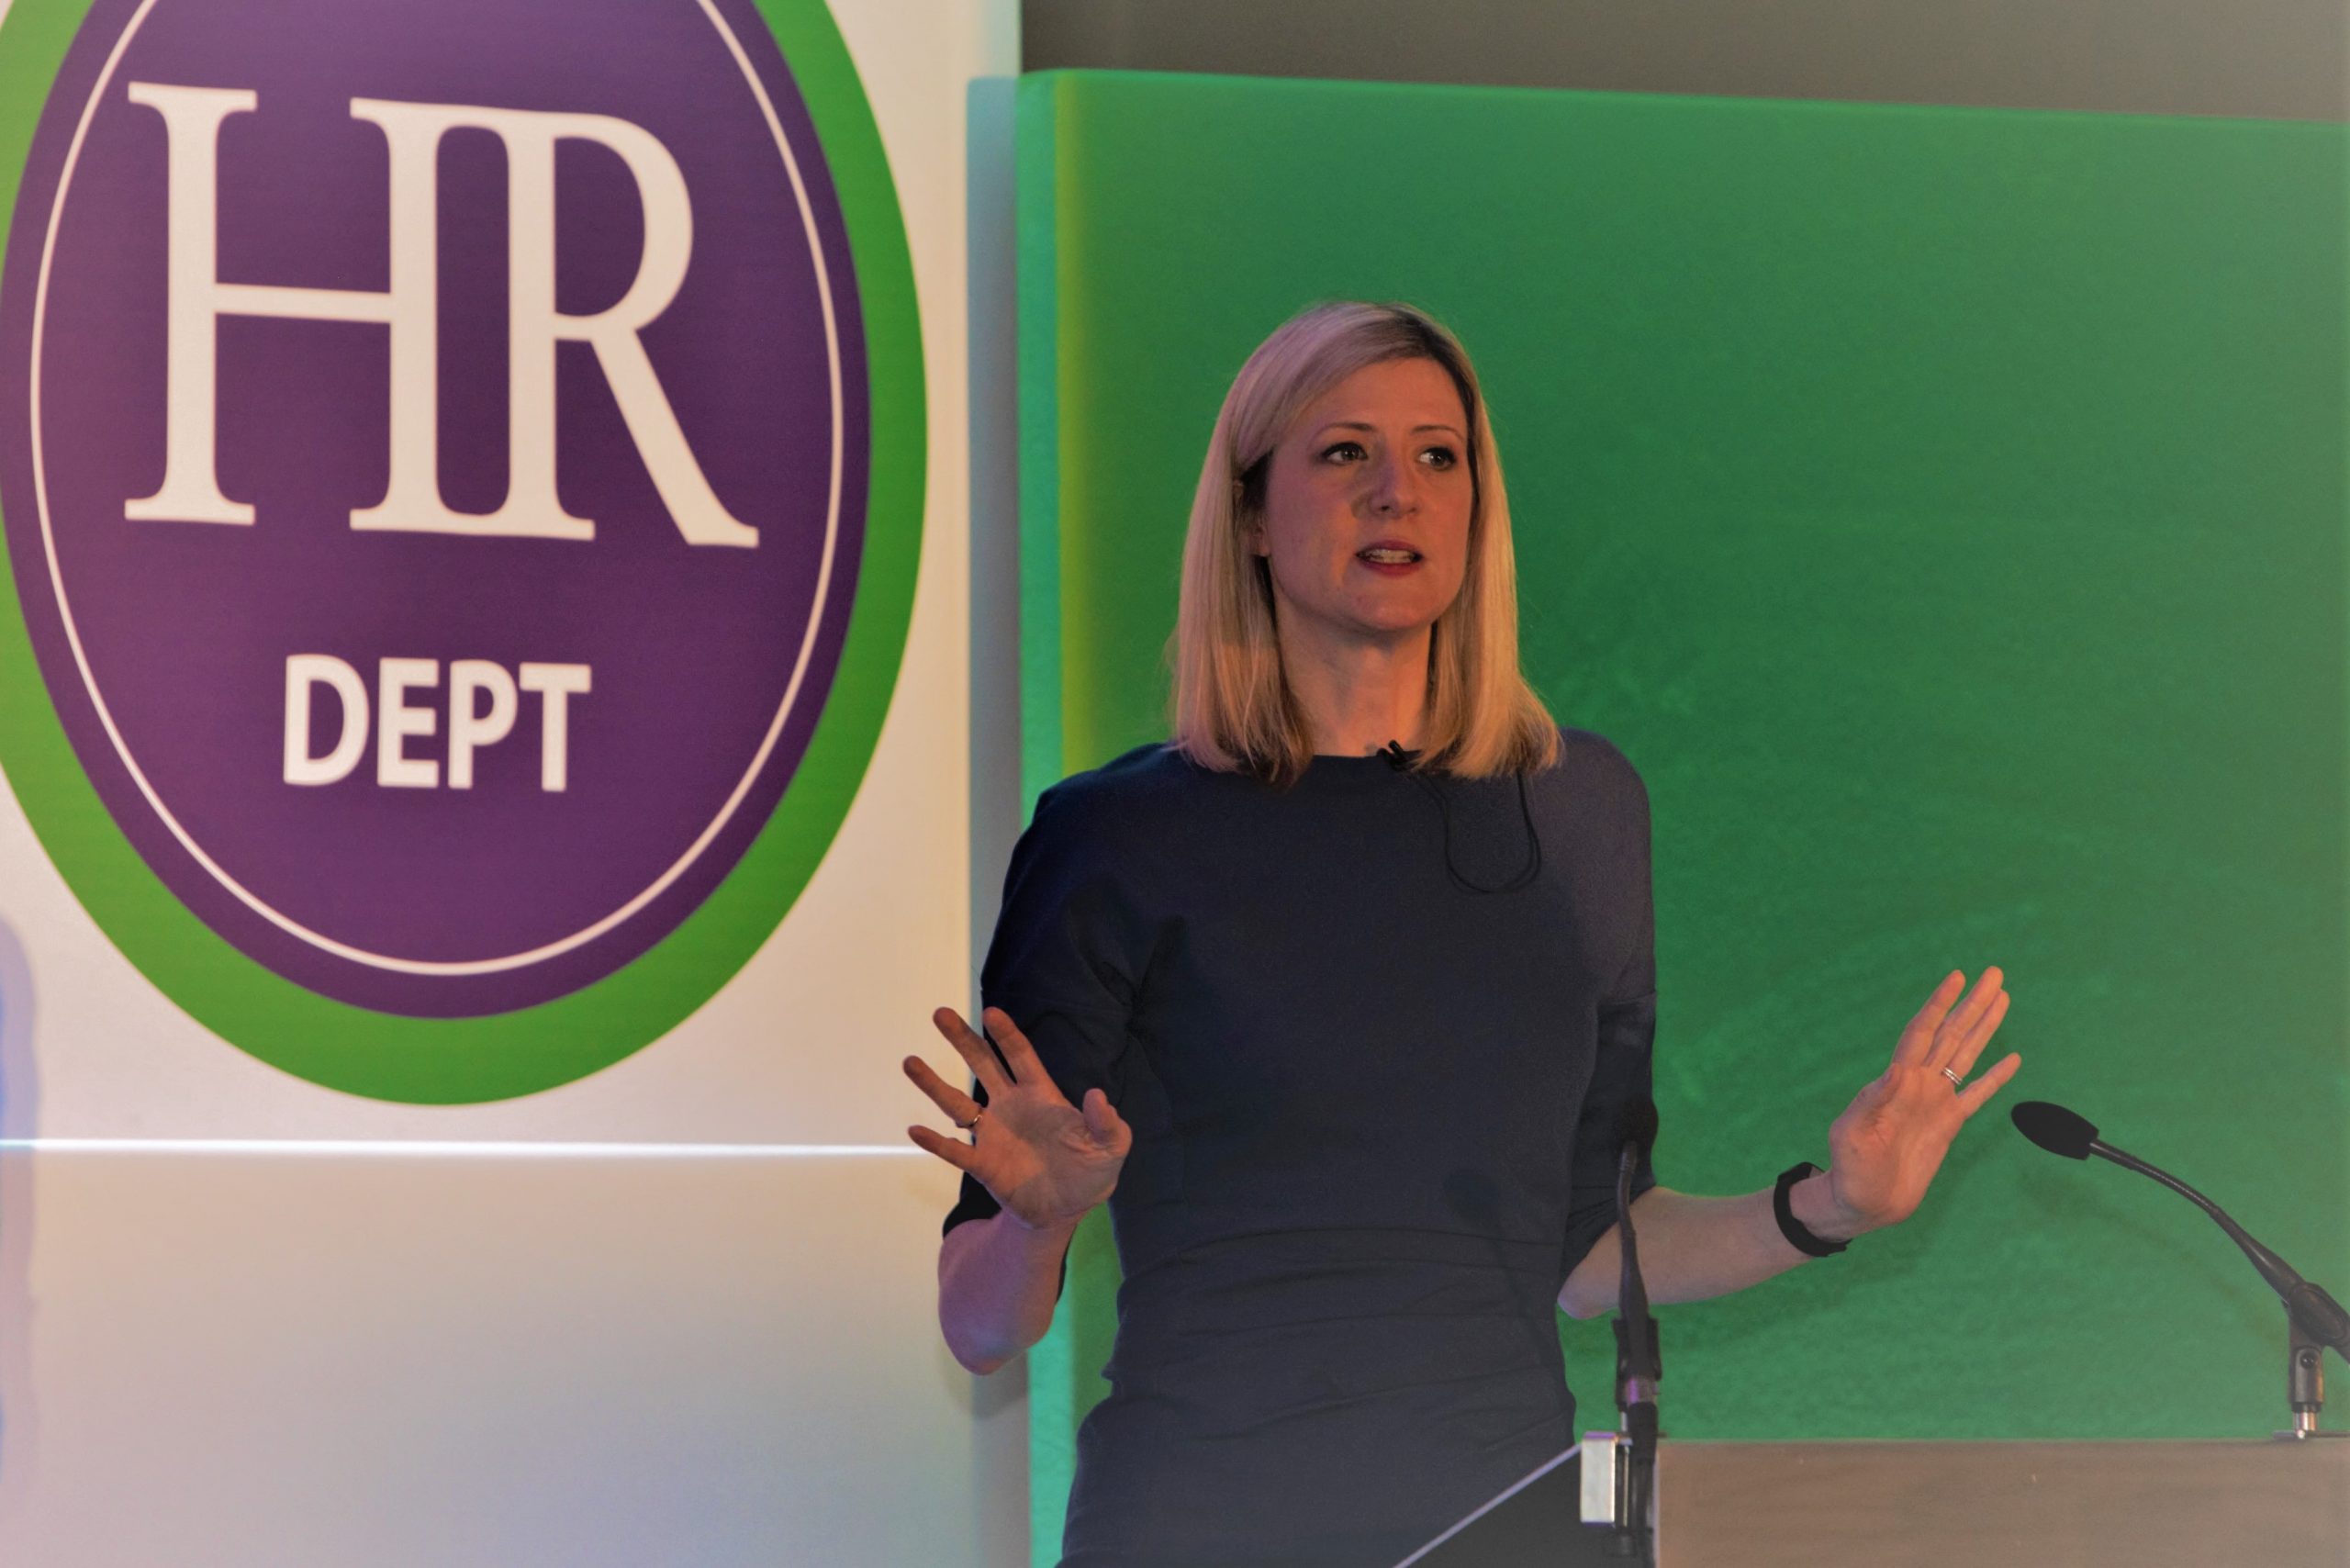 https://www.turnthetablespr.com/app/uploads/2020/05/Claire-Walker-co-executive-director-of-policy-and-campaigns-at-British-Chambers-of-Commerce-2-scaled.jpg